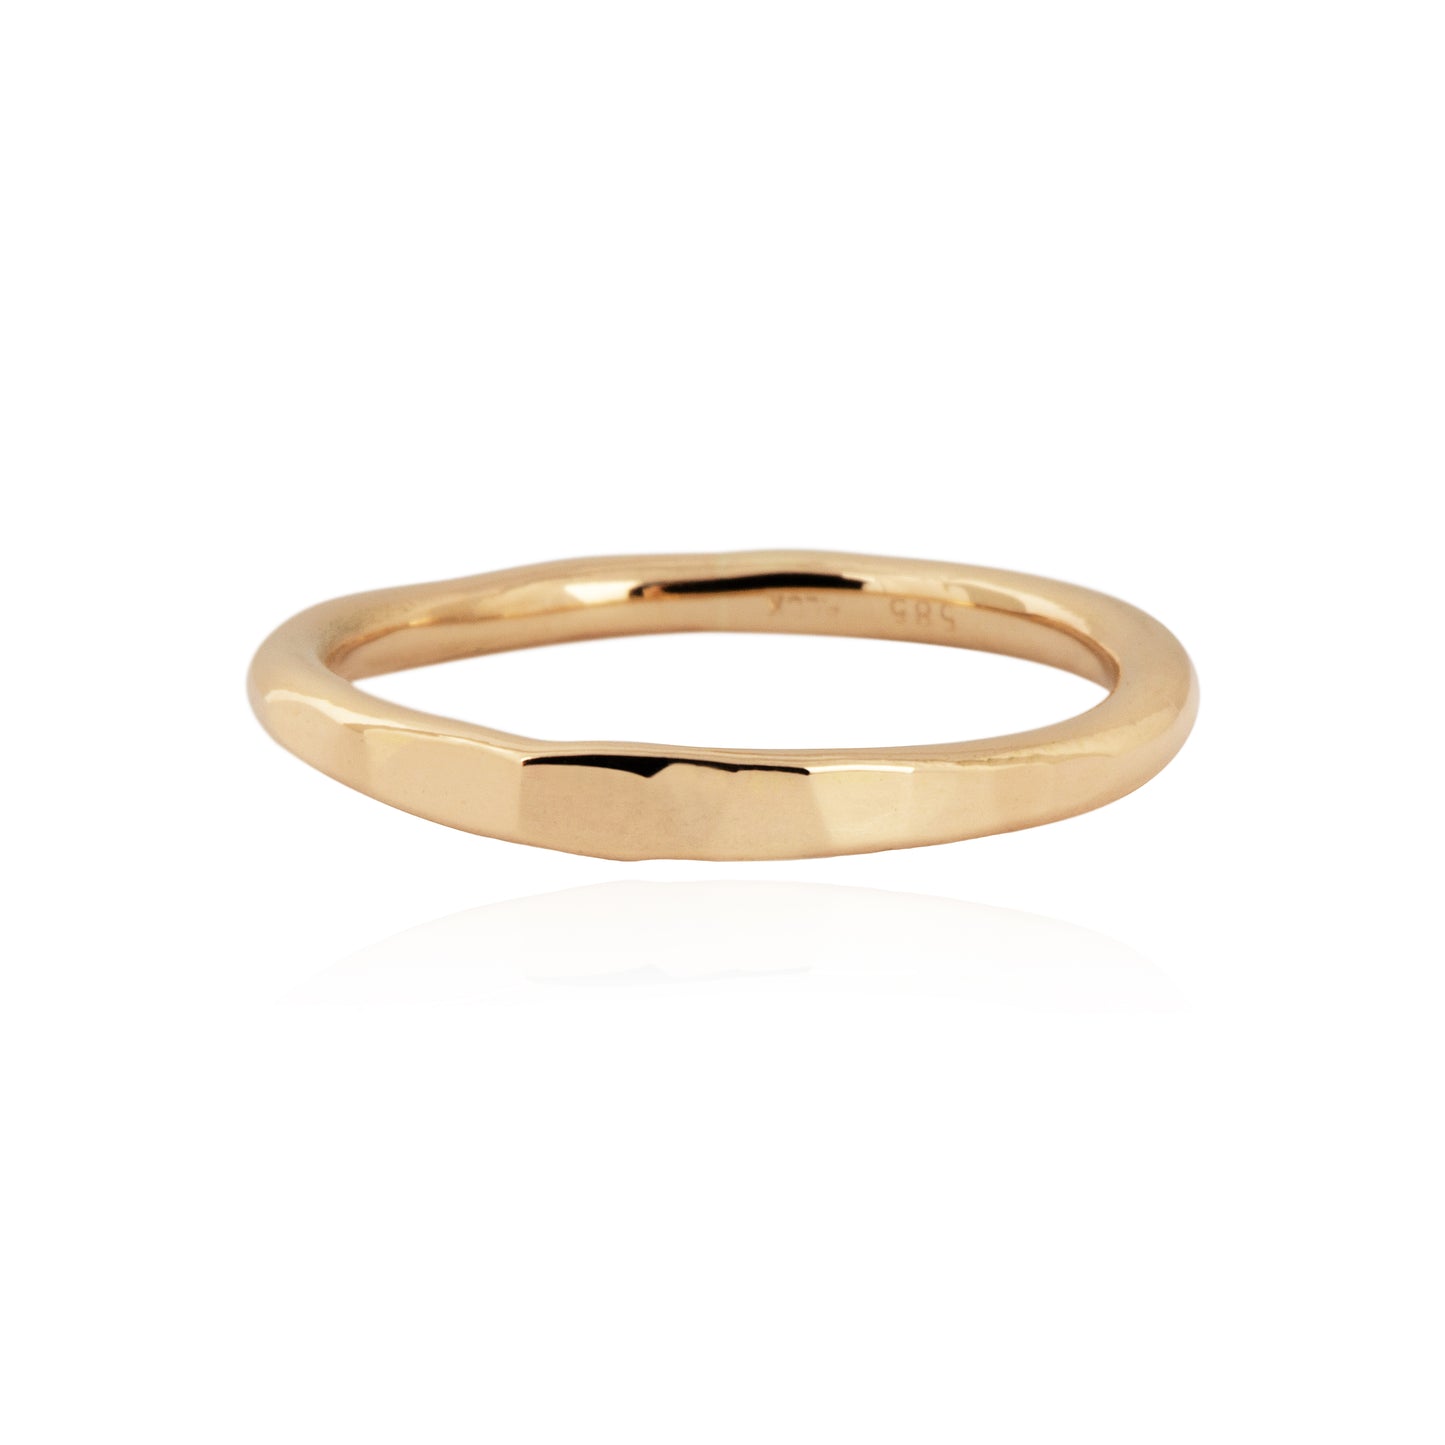 Onepoint Hammered Ring 0.2 14k gold